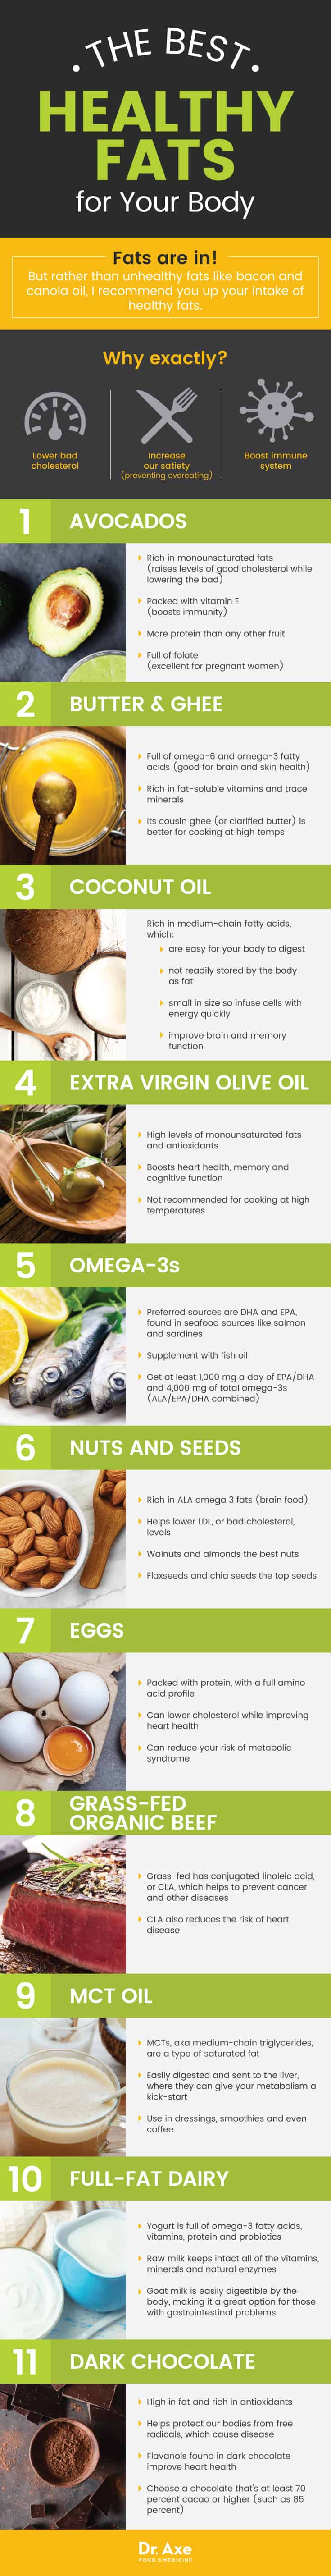 Healthy fats guide - Dr. Axe